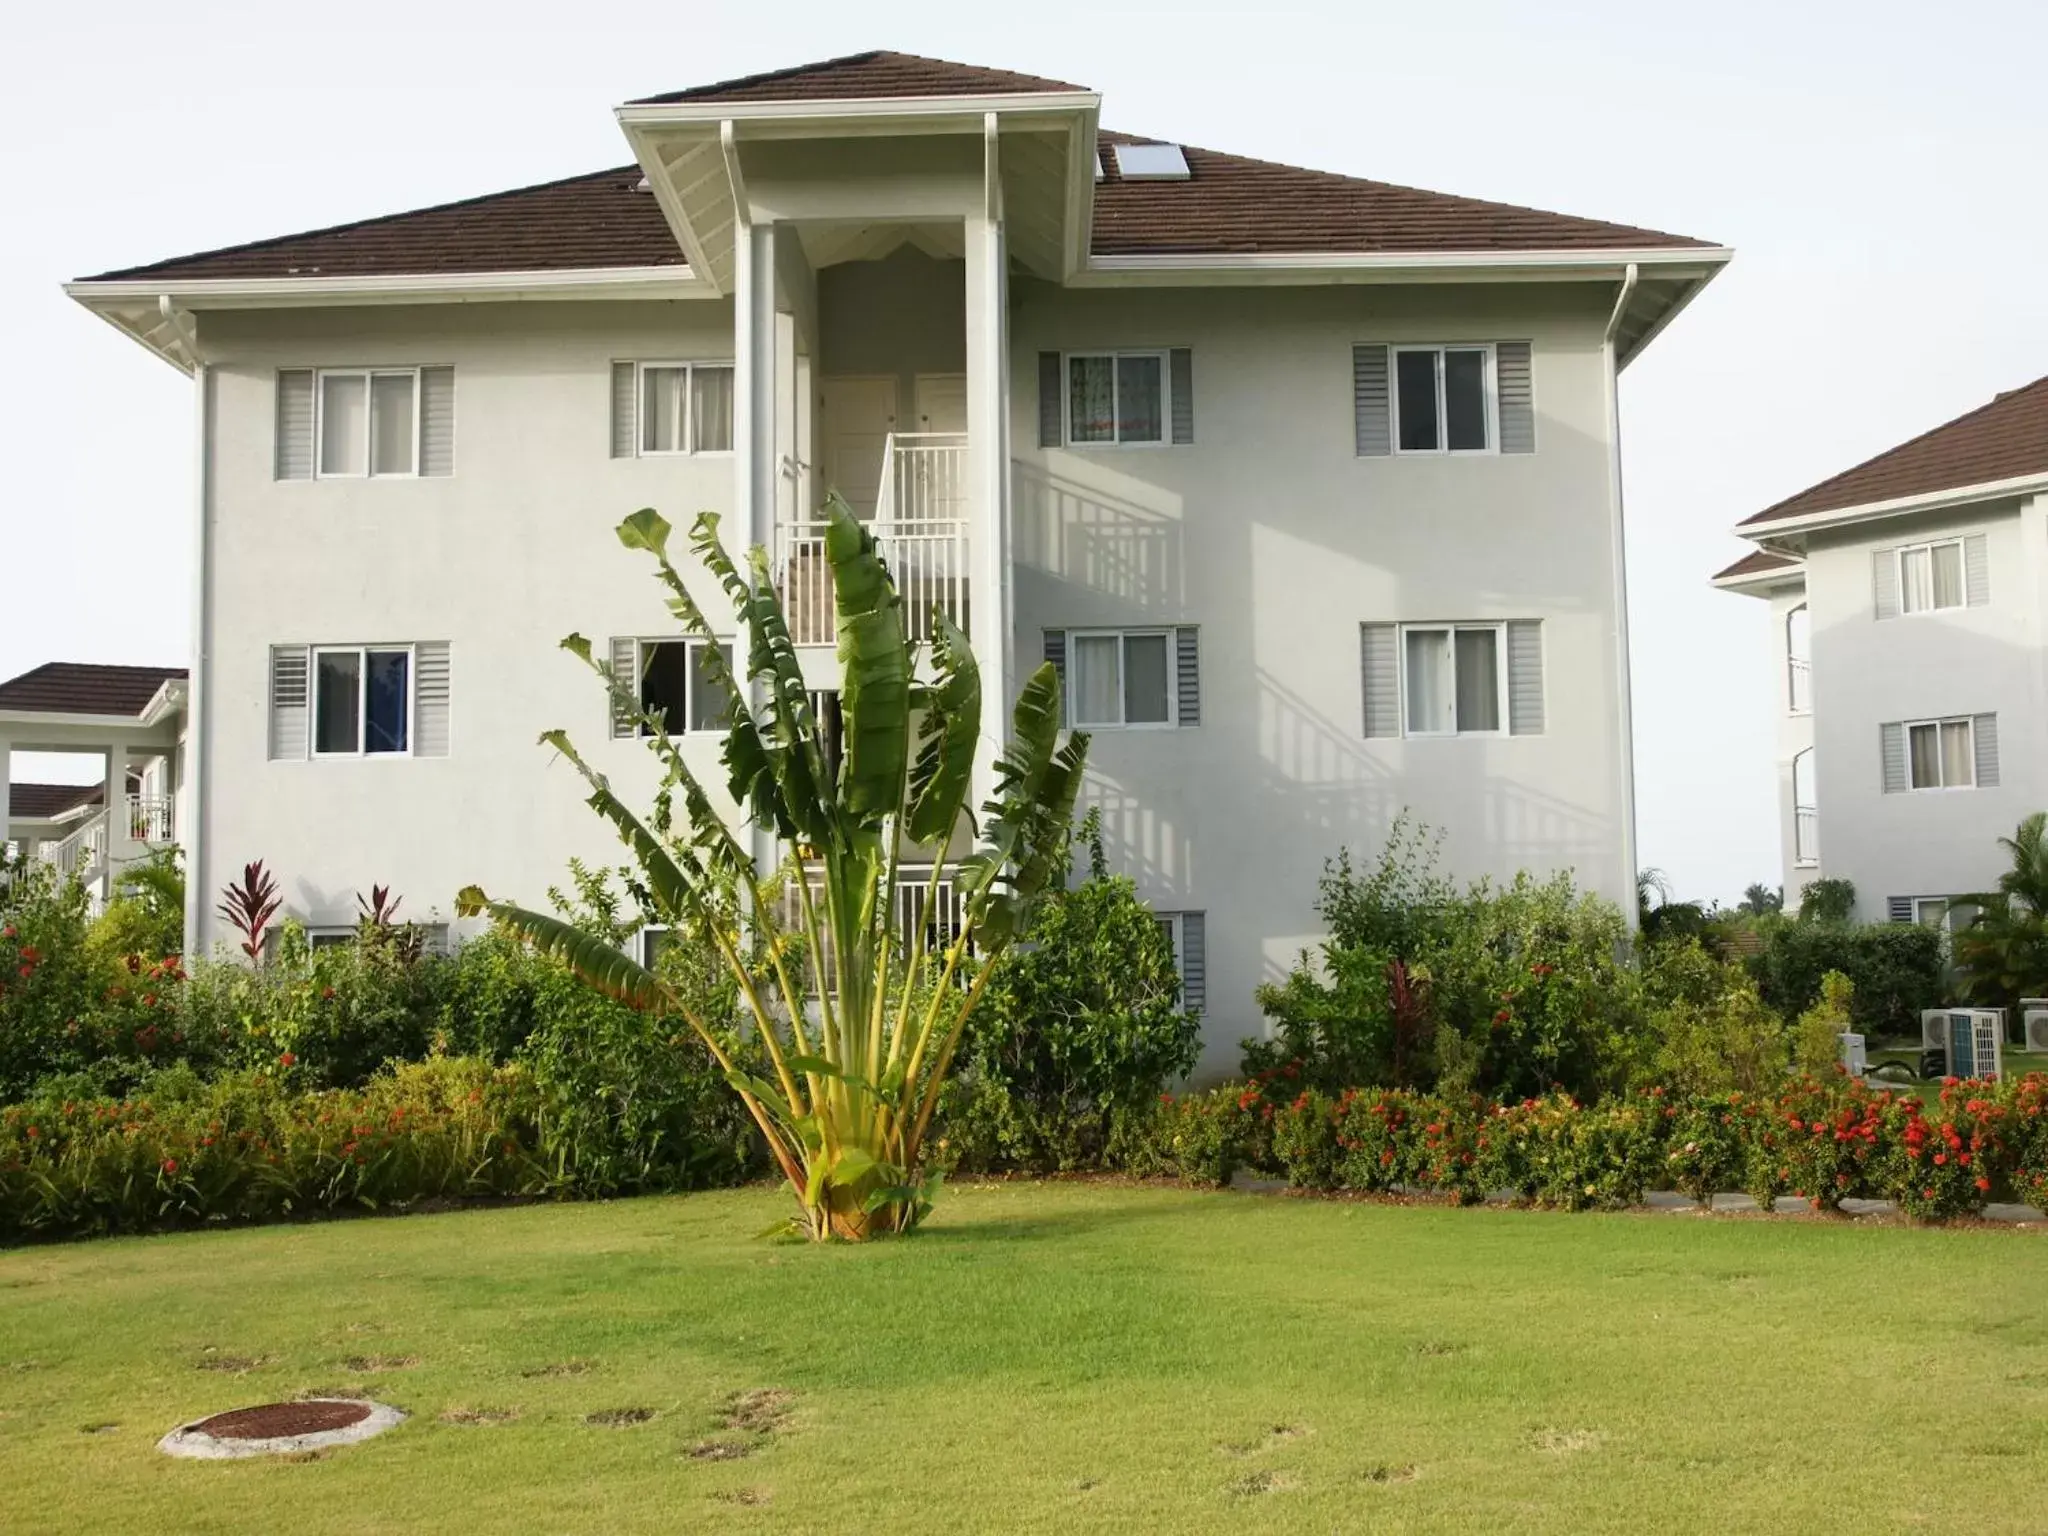 Two-Bedroom Apartment in Jamnick Vacation Rentals - Richmond, St Ann, Jamaica